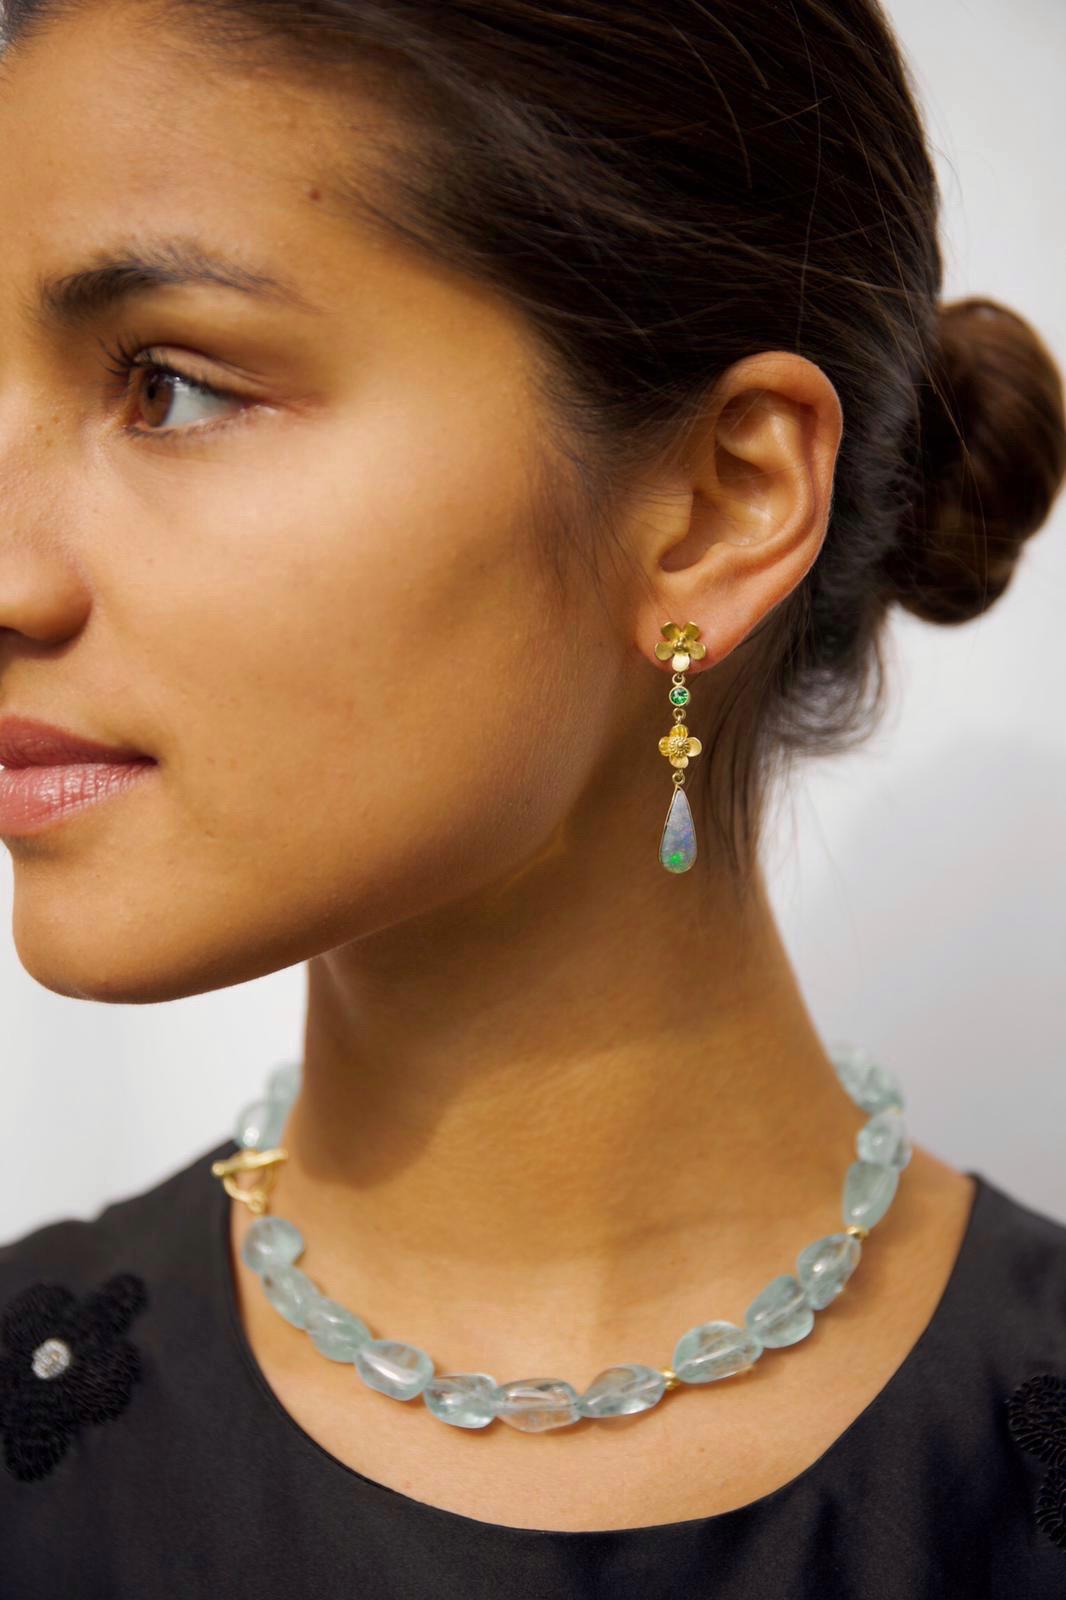 A lovely handmade and one-of-a-kind pair of asymmetrical 18k gold earrings with boulder opals and lush green peridots suspended from 18k gold flowers. The asymmetry accentuates the beauty and uniqueness of the opals. A feminine and lightweight piece